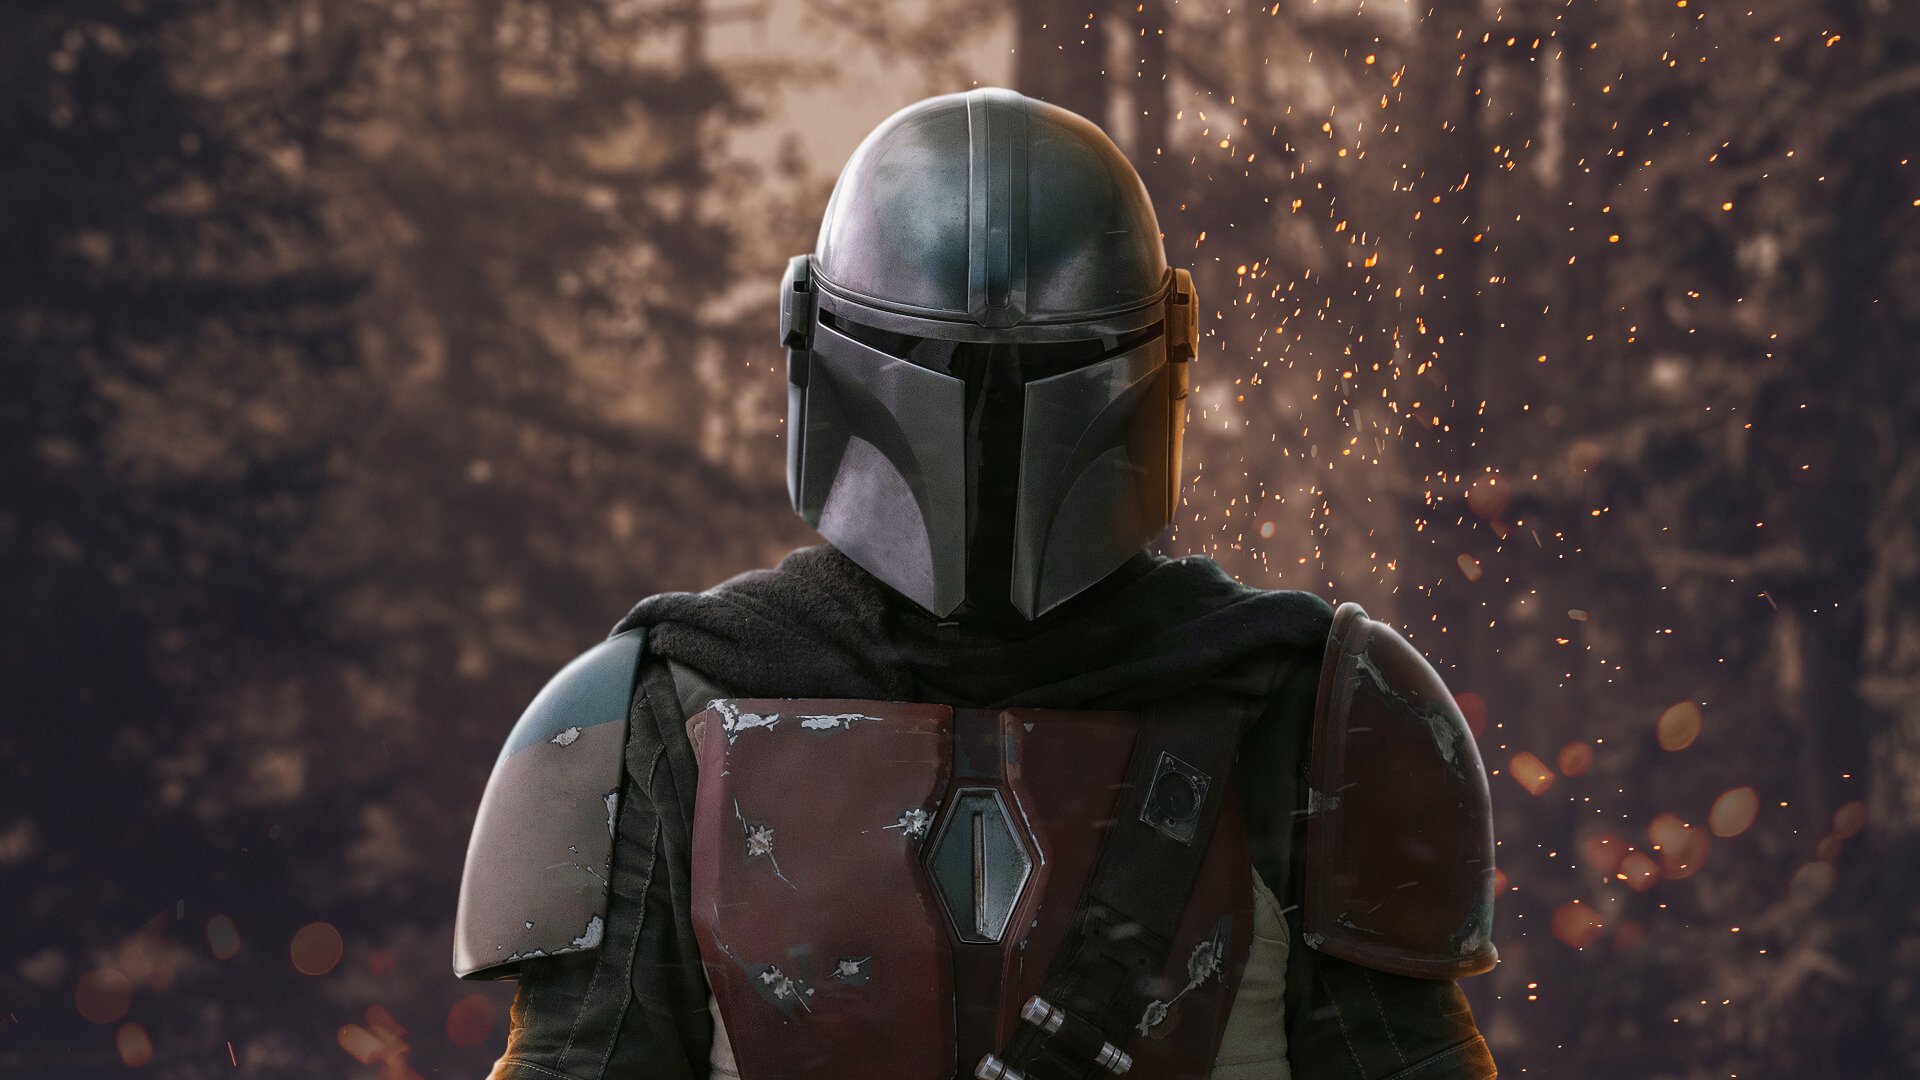 Mandalorian Zoom Background Video Wars Star Backgrounds Zoom Images